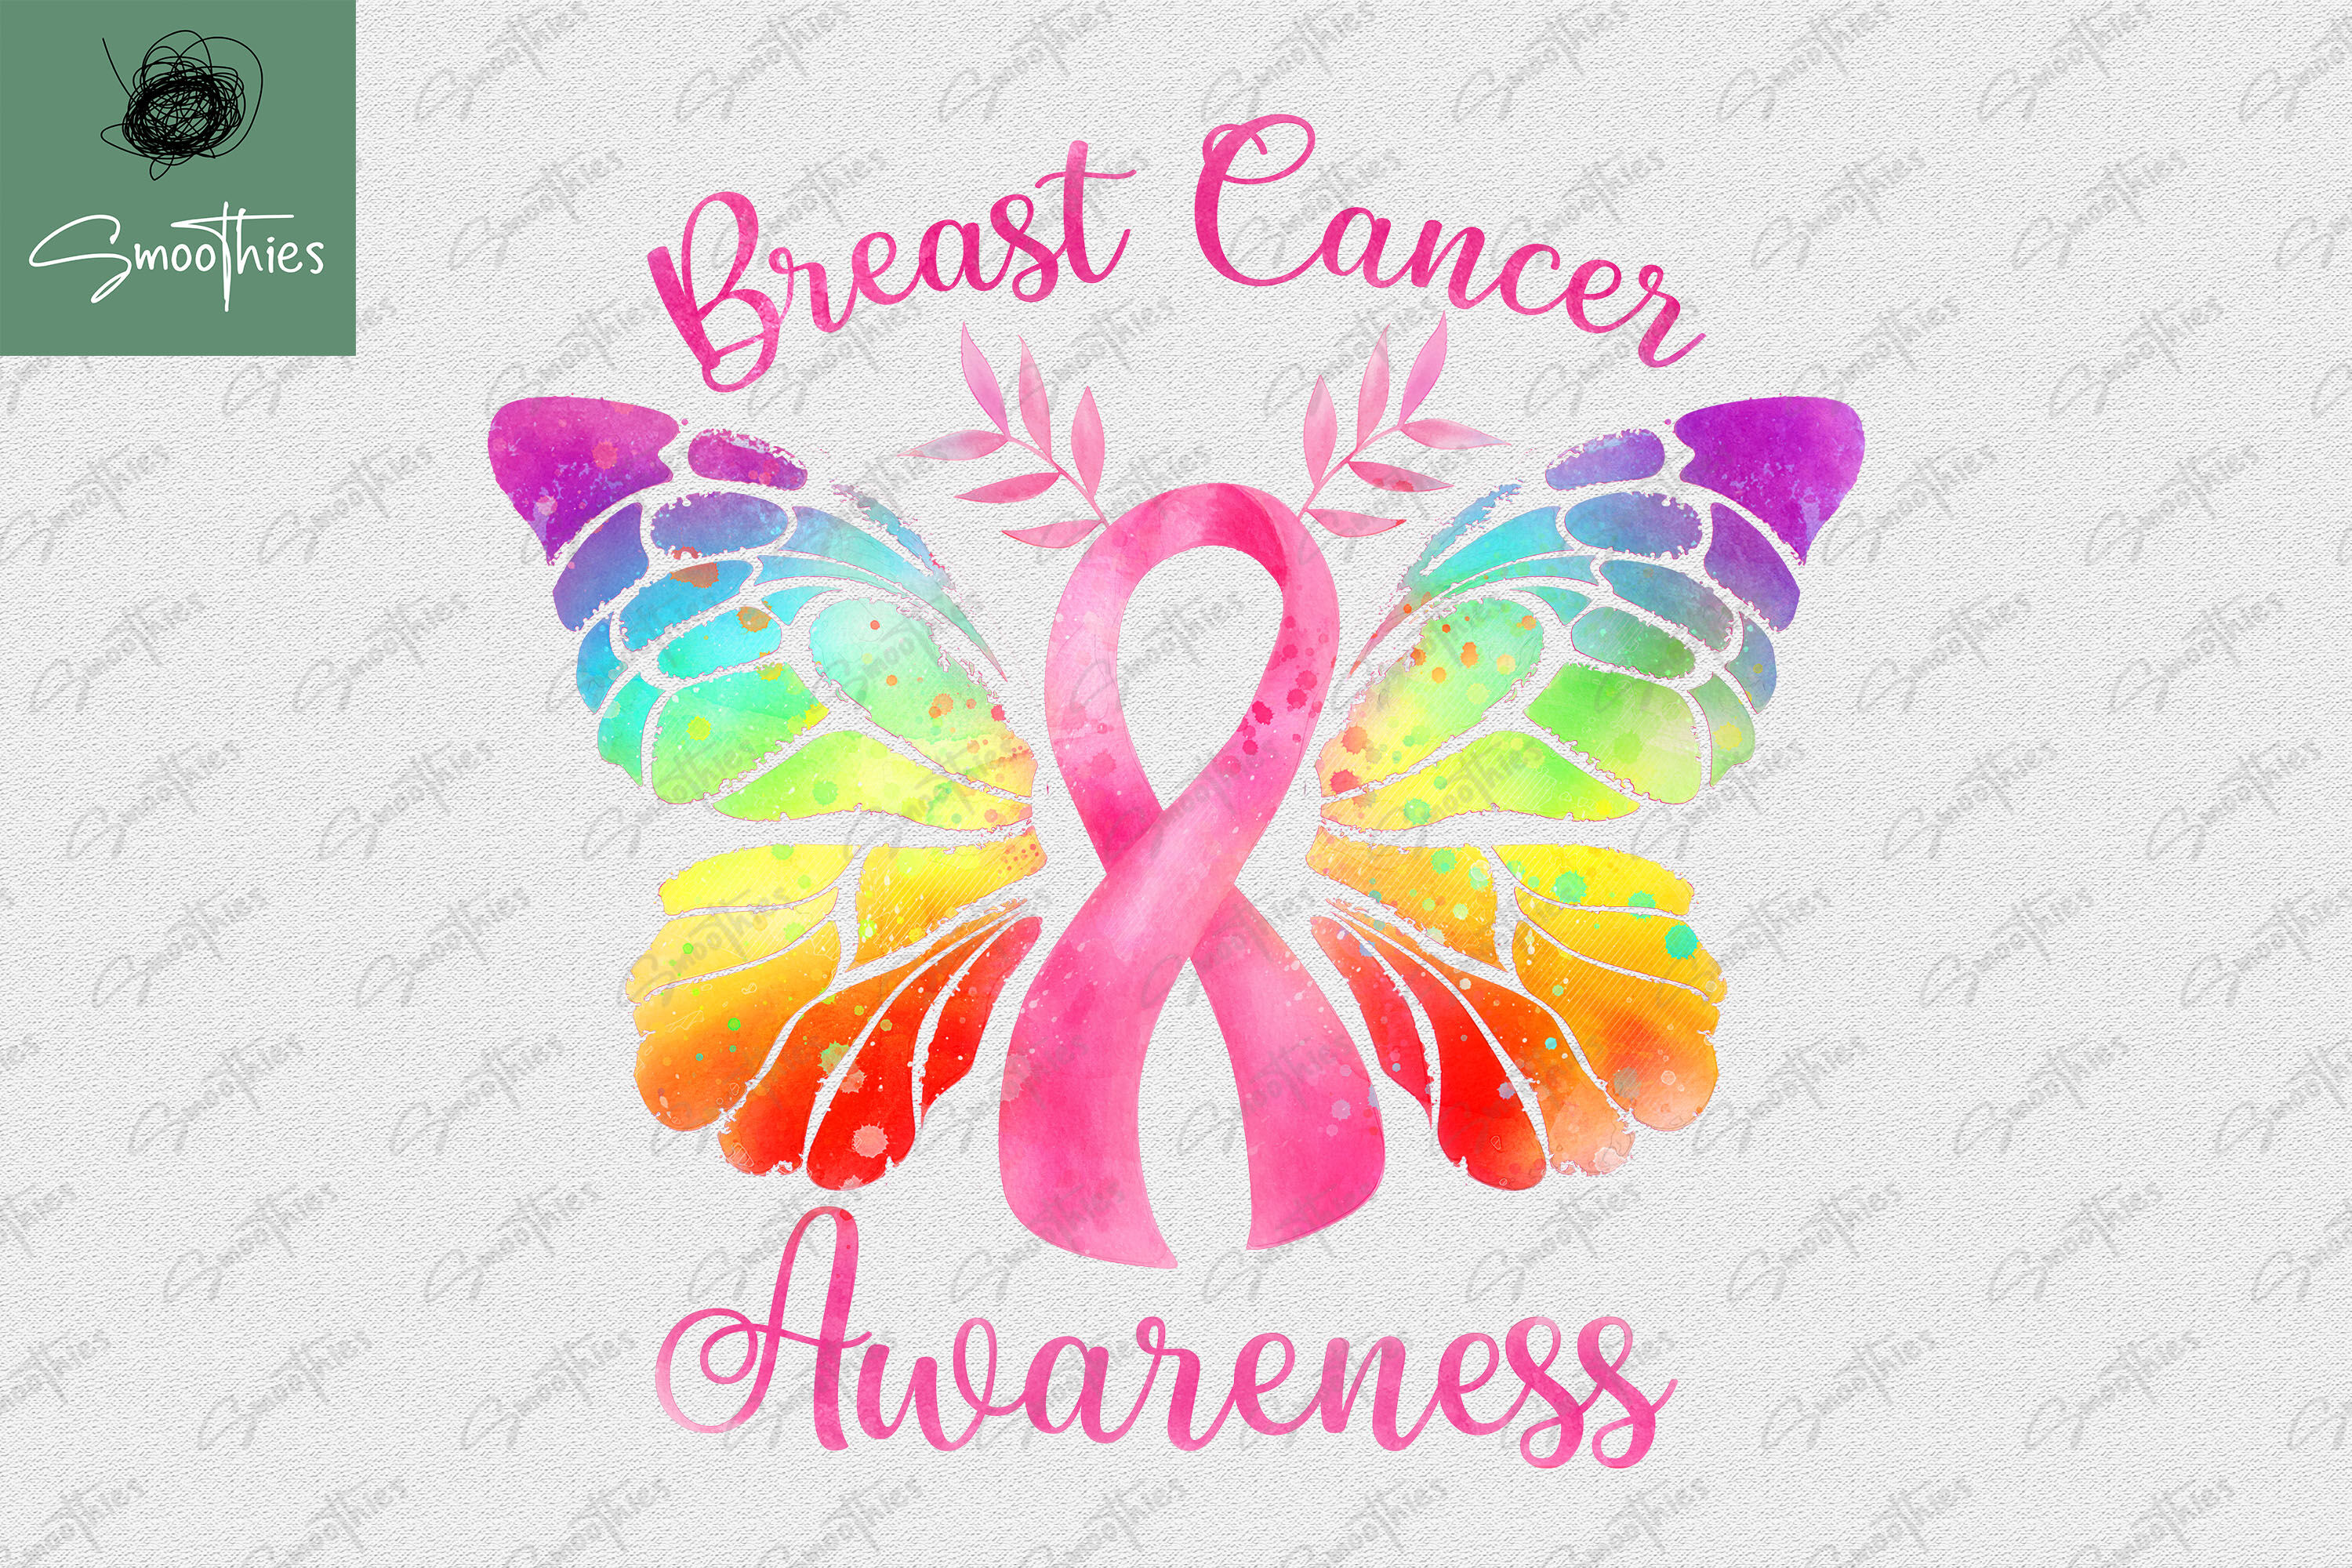 1. Butterfly Breast Cancer Ribbon Tattoo - wide 7